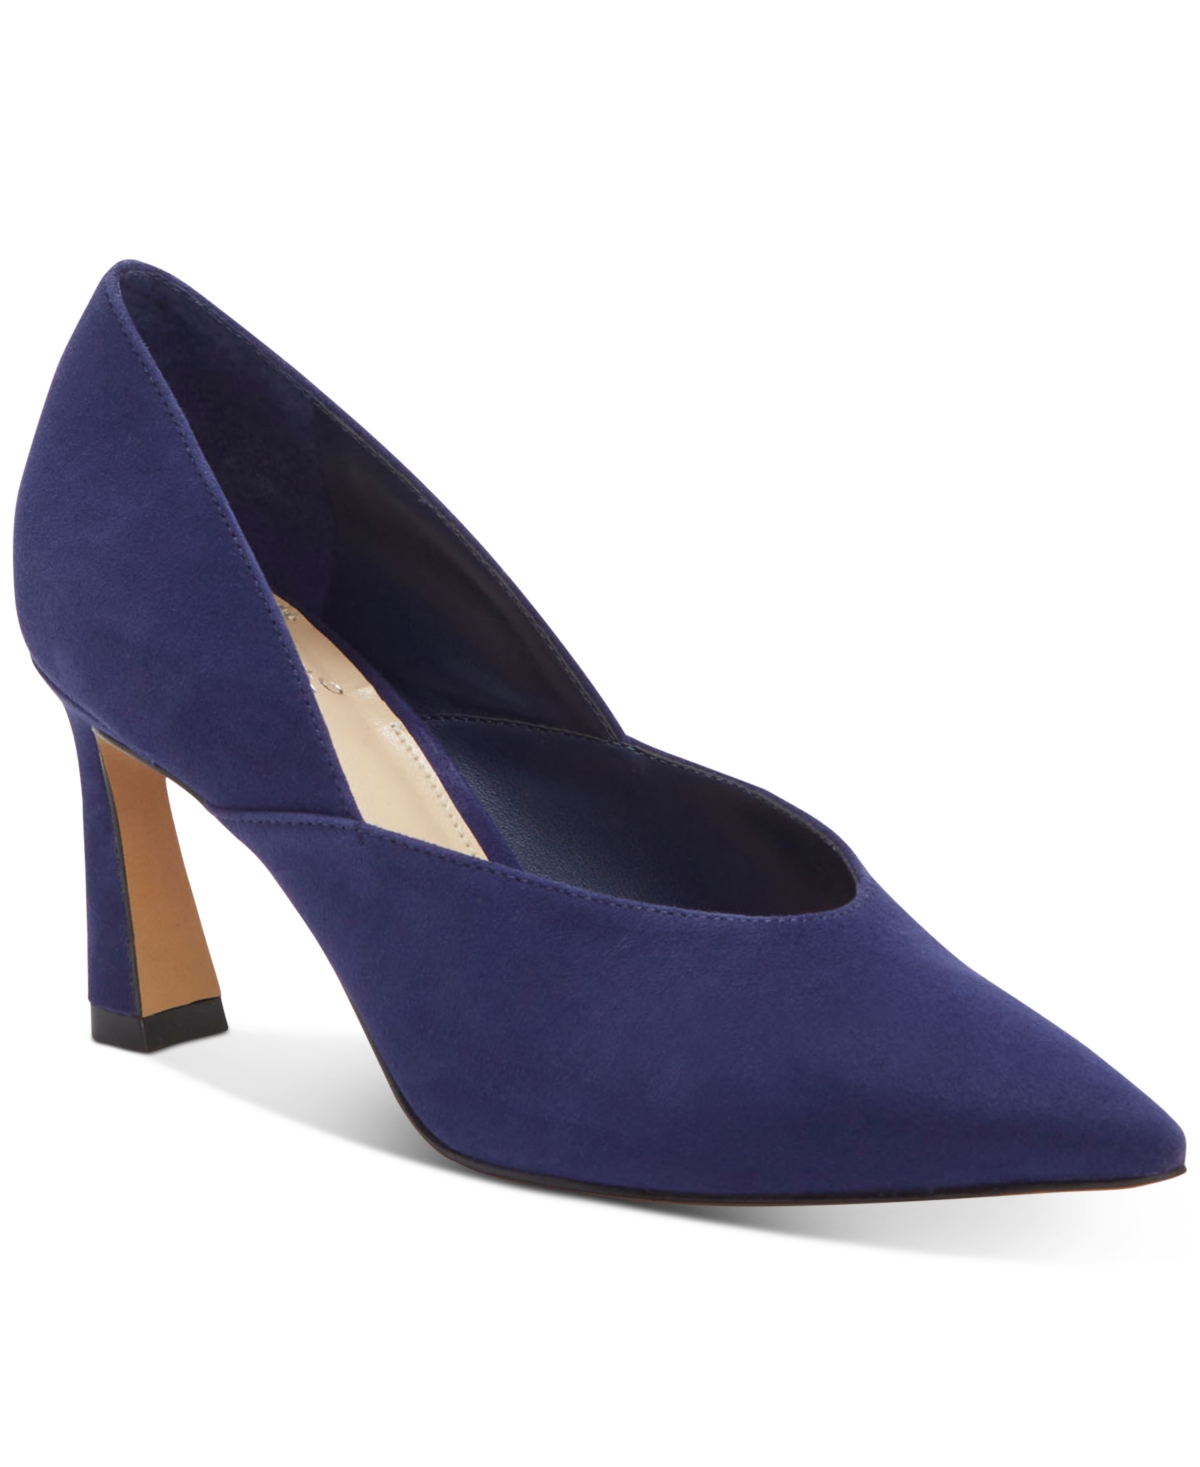 UPC 191707307360 product image for Vince Camuto Women's Kastani Pointed-Toe Pumps Women's Shoes | upcitemdb.com